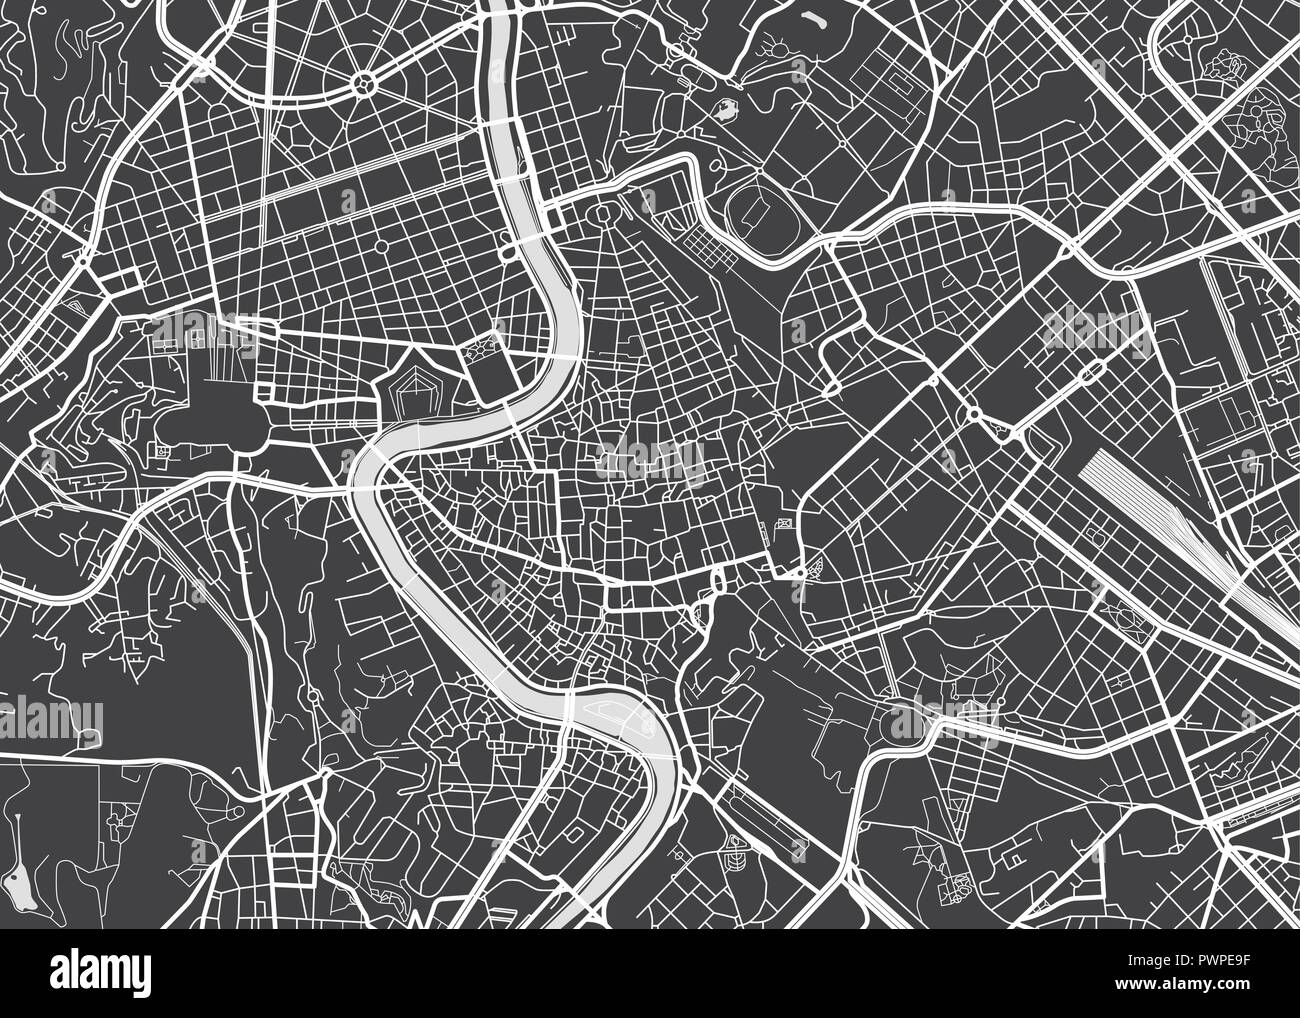 Vector detailed map Rome detailed plan of the city, rivers and streets Stock Vector